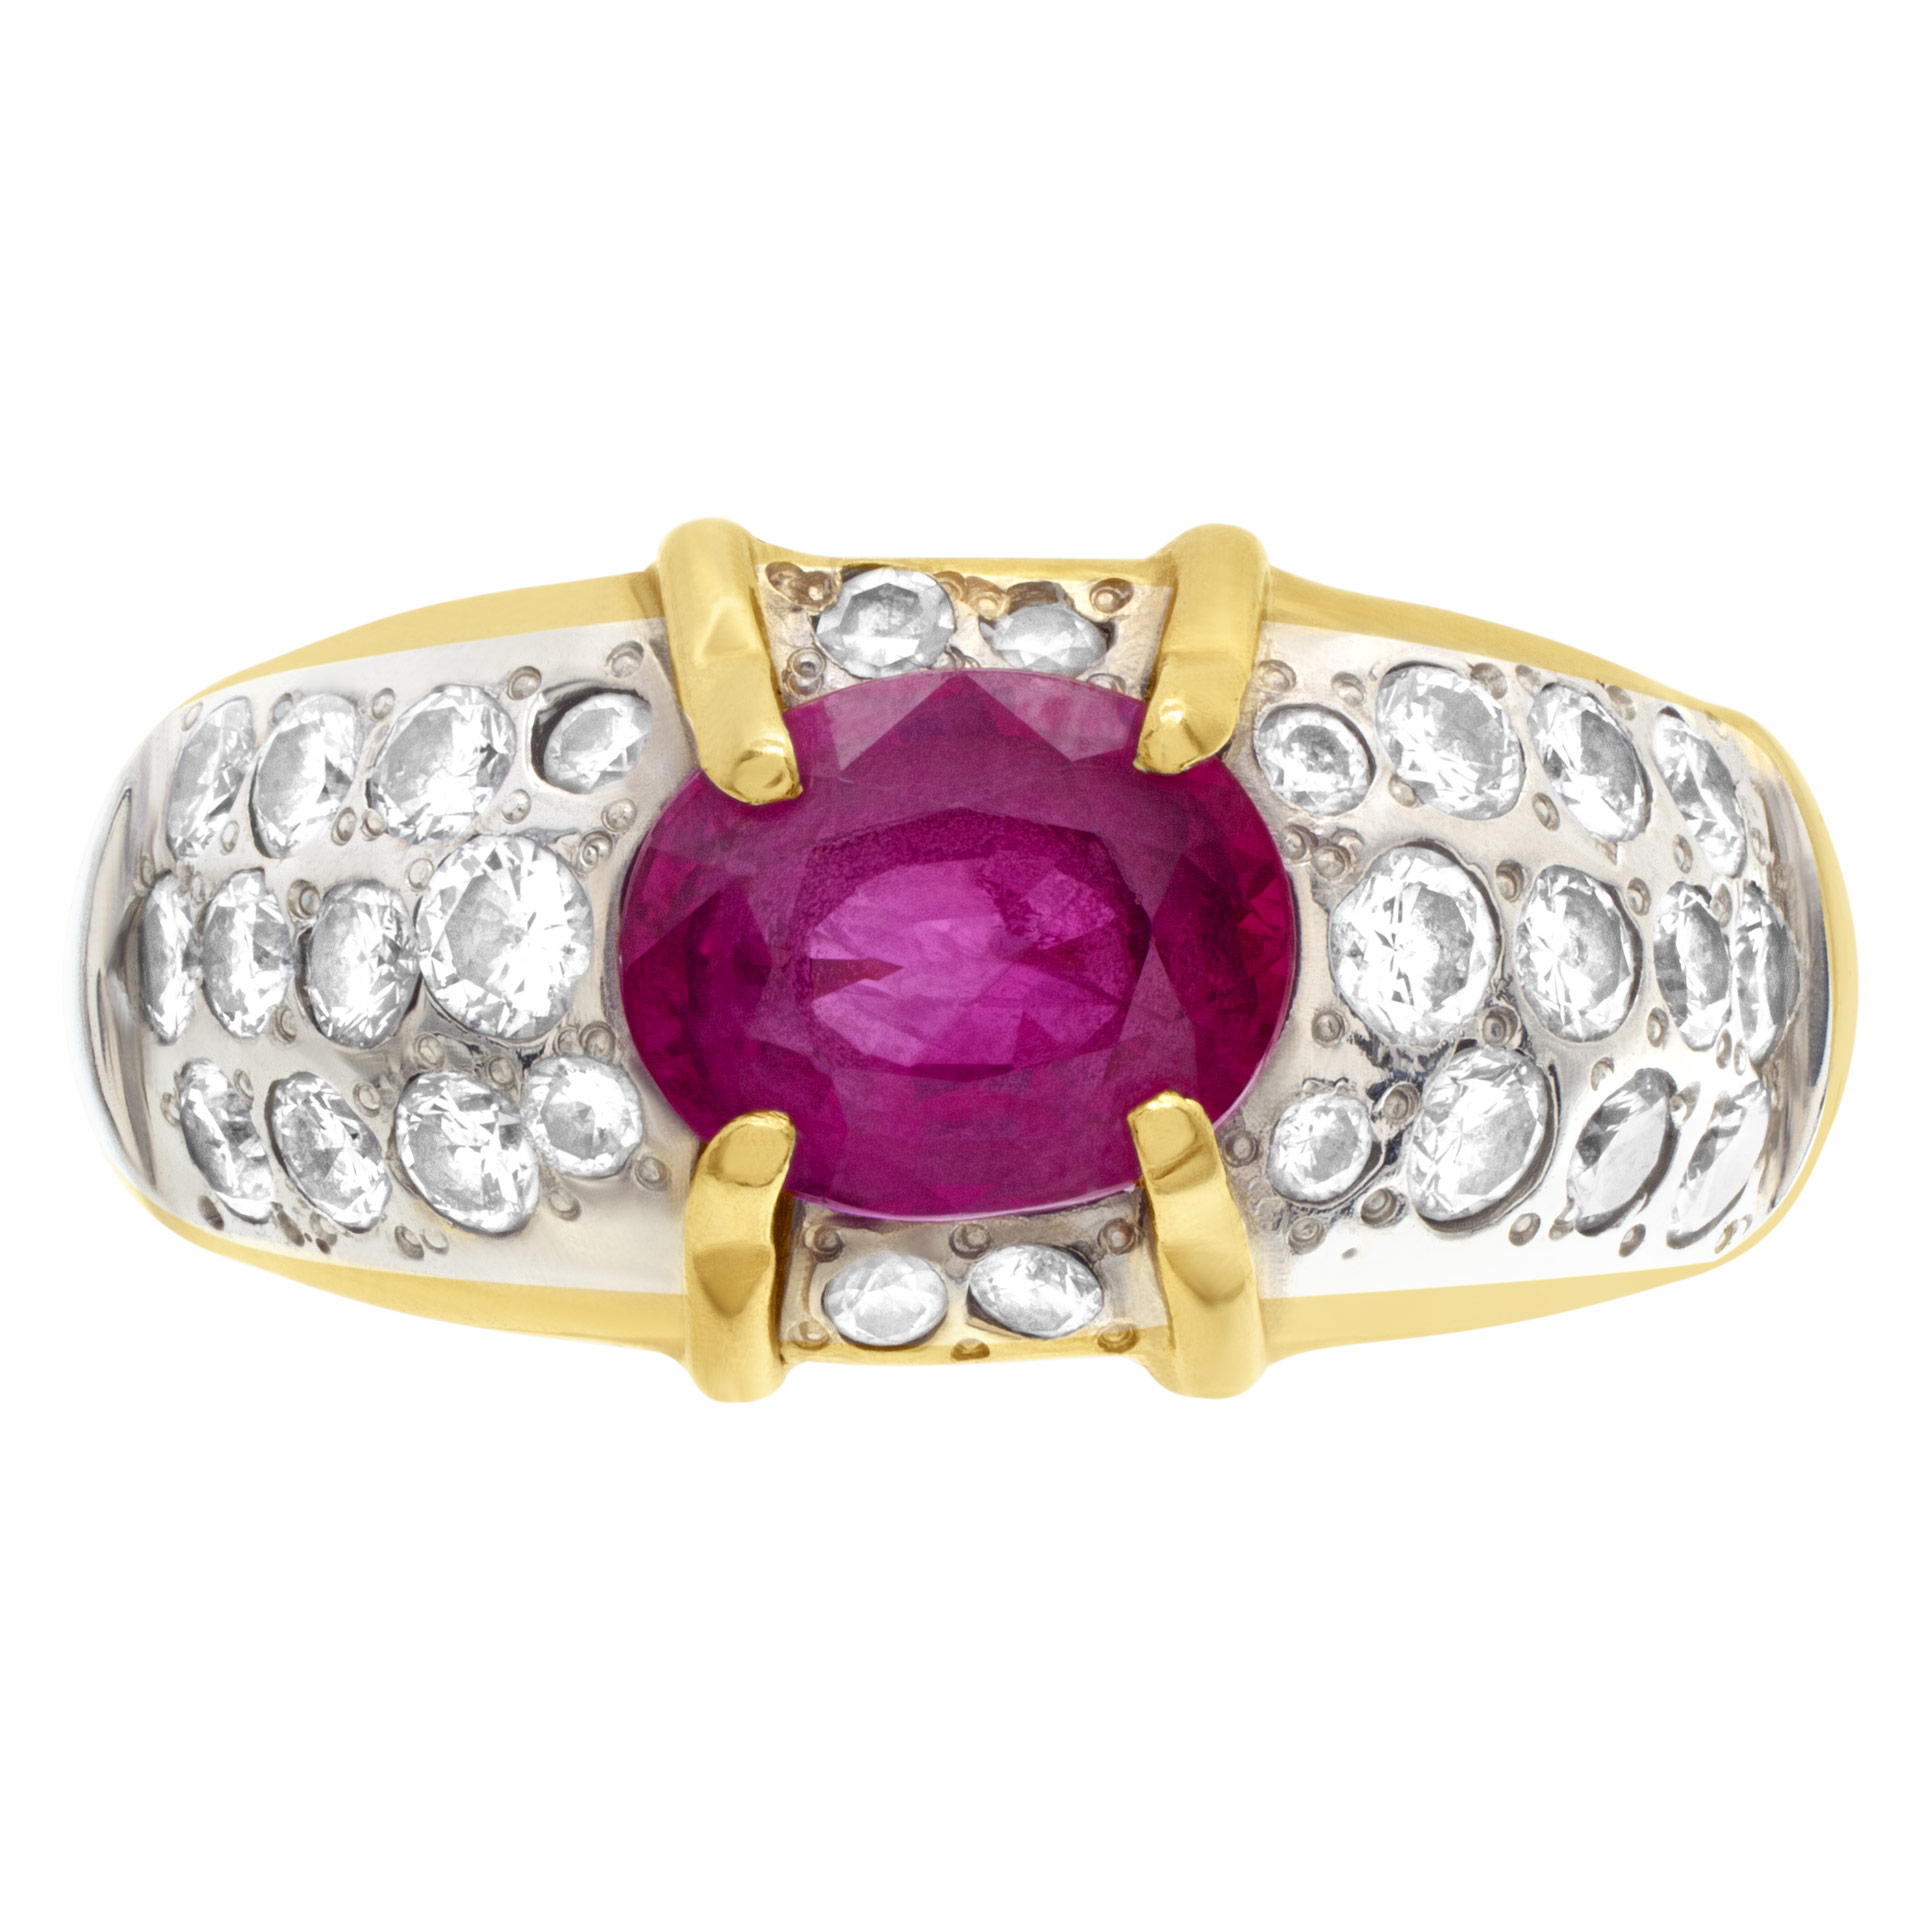 Ladies 2ct pink sapphire ring with diamond accents in 18k gold